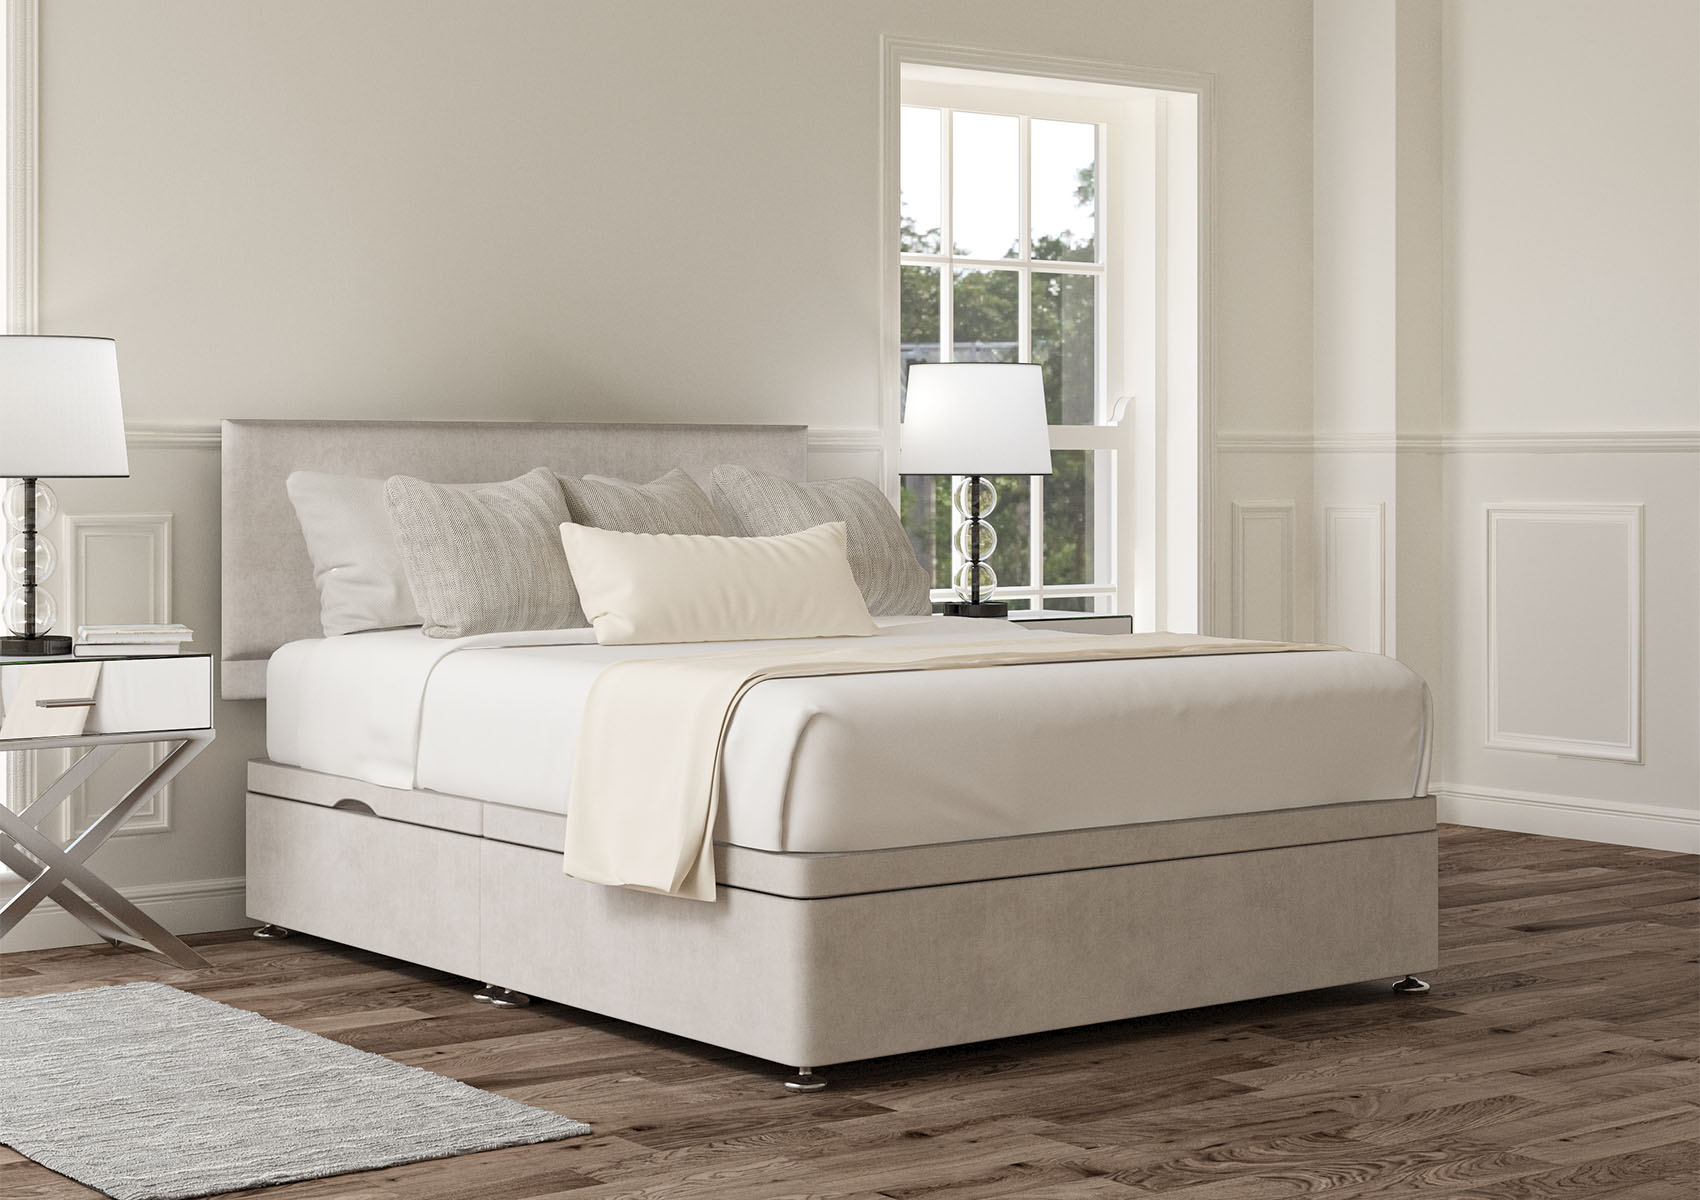 View Henley Plush Silver Upholstered Single Ottoman Bed Time4Sleep information